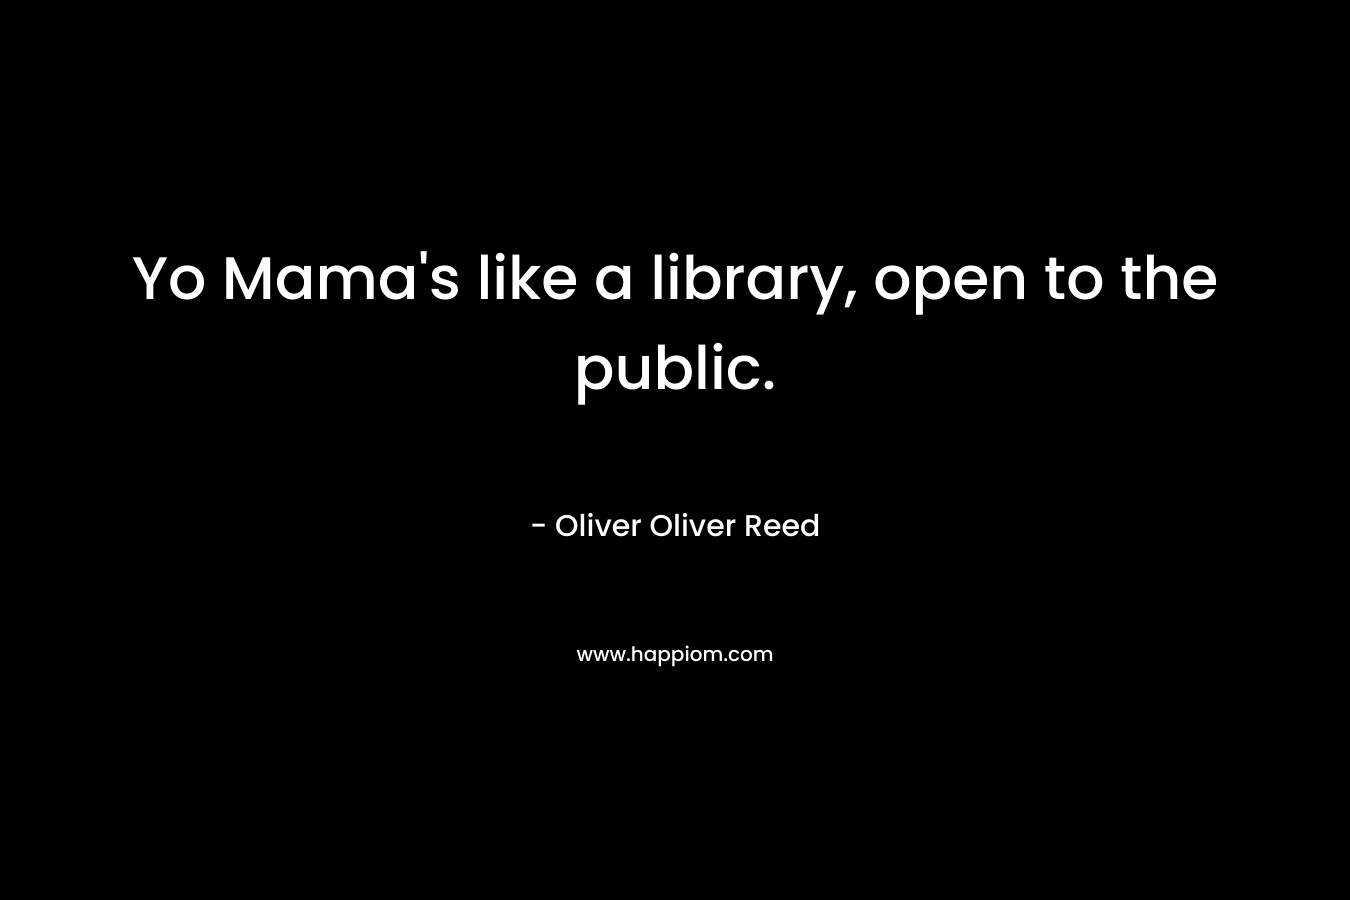 Yo Mama’s like a library, open to the public. – Oliver Oliver Reed